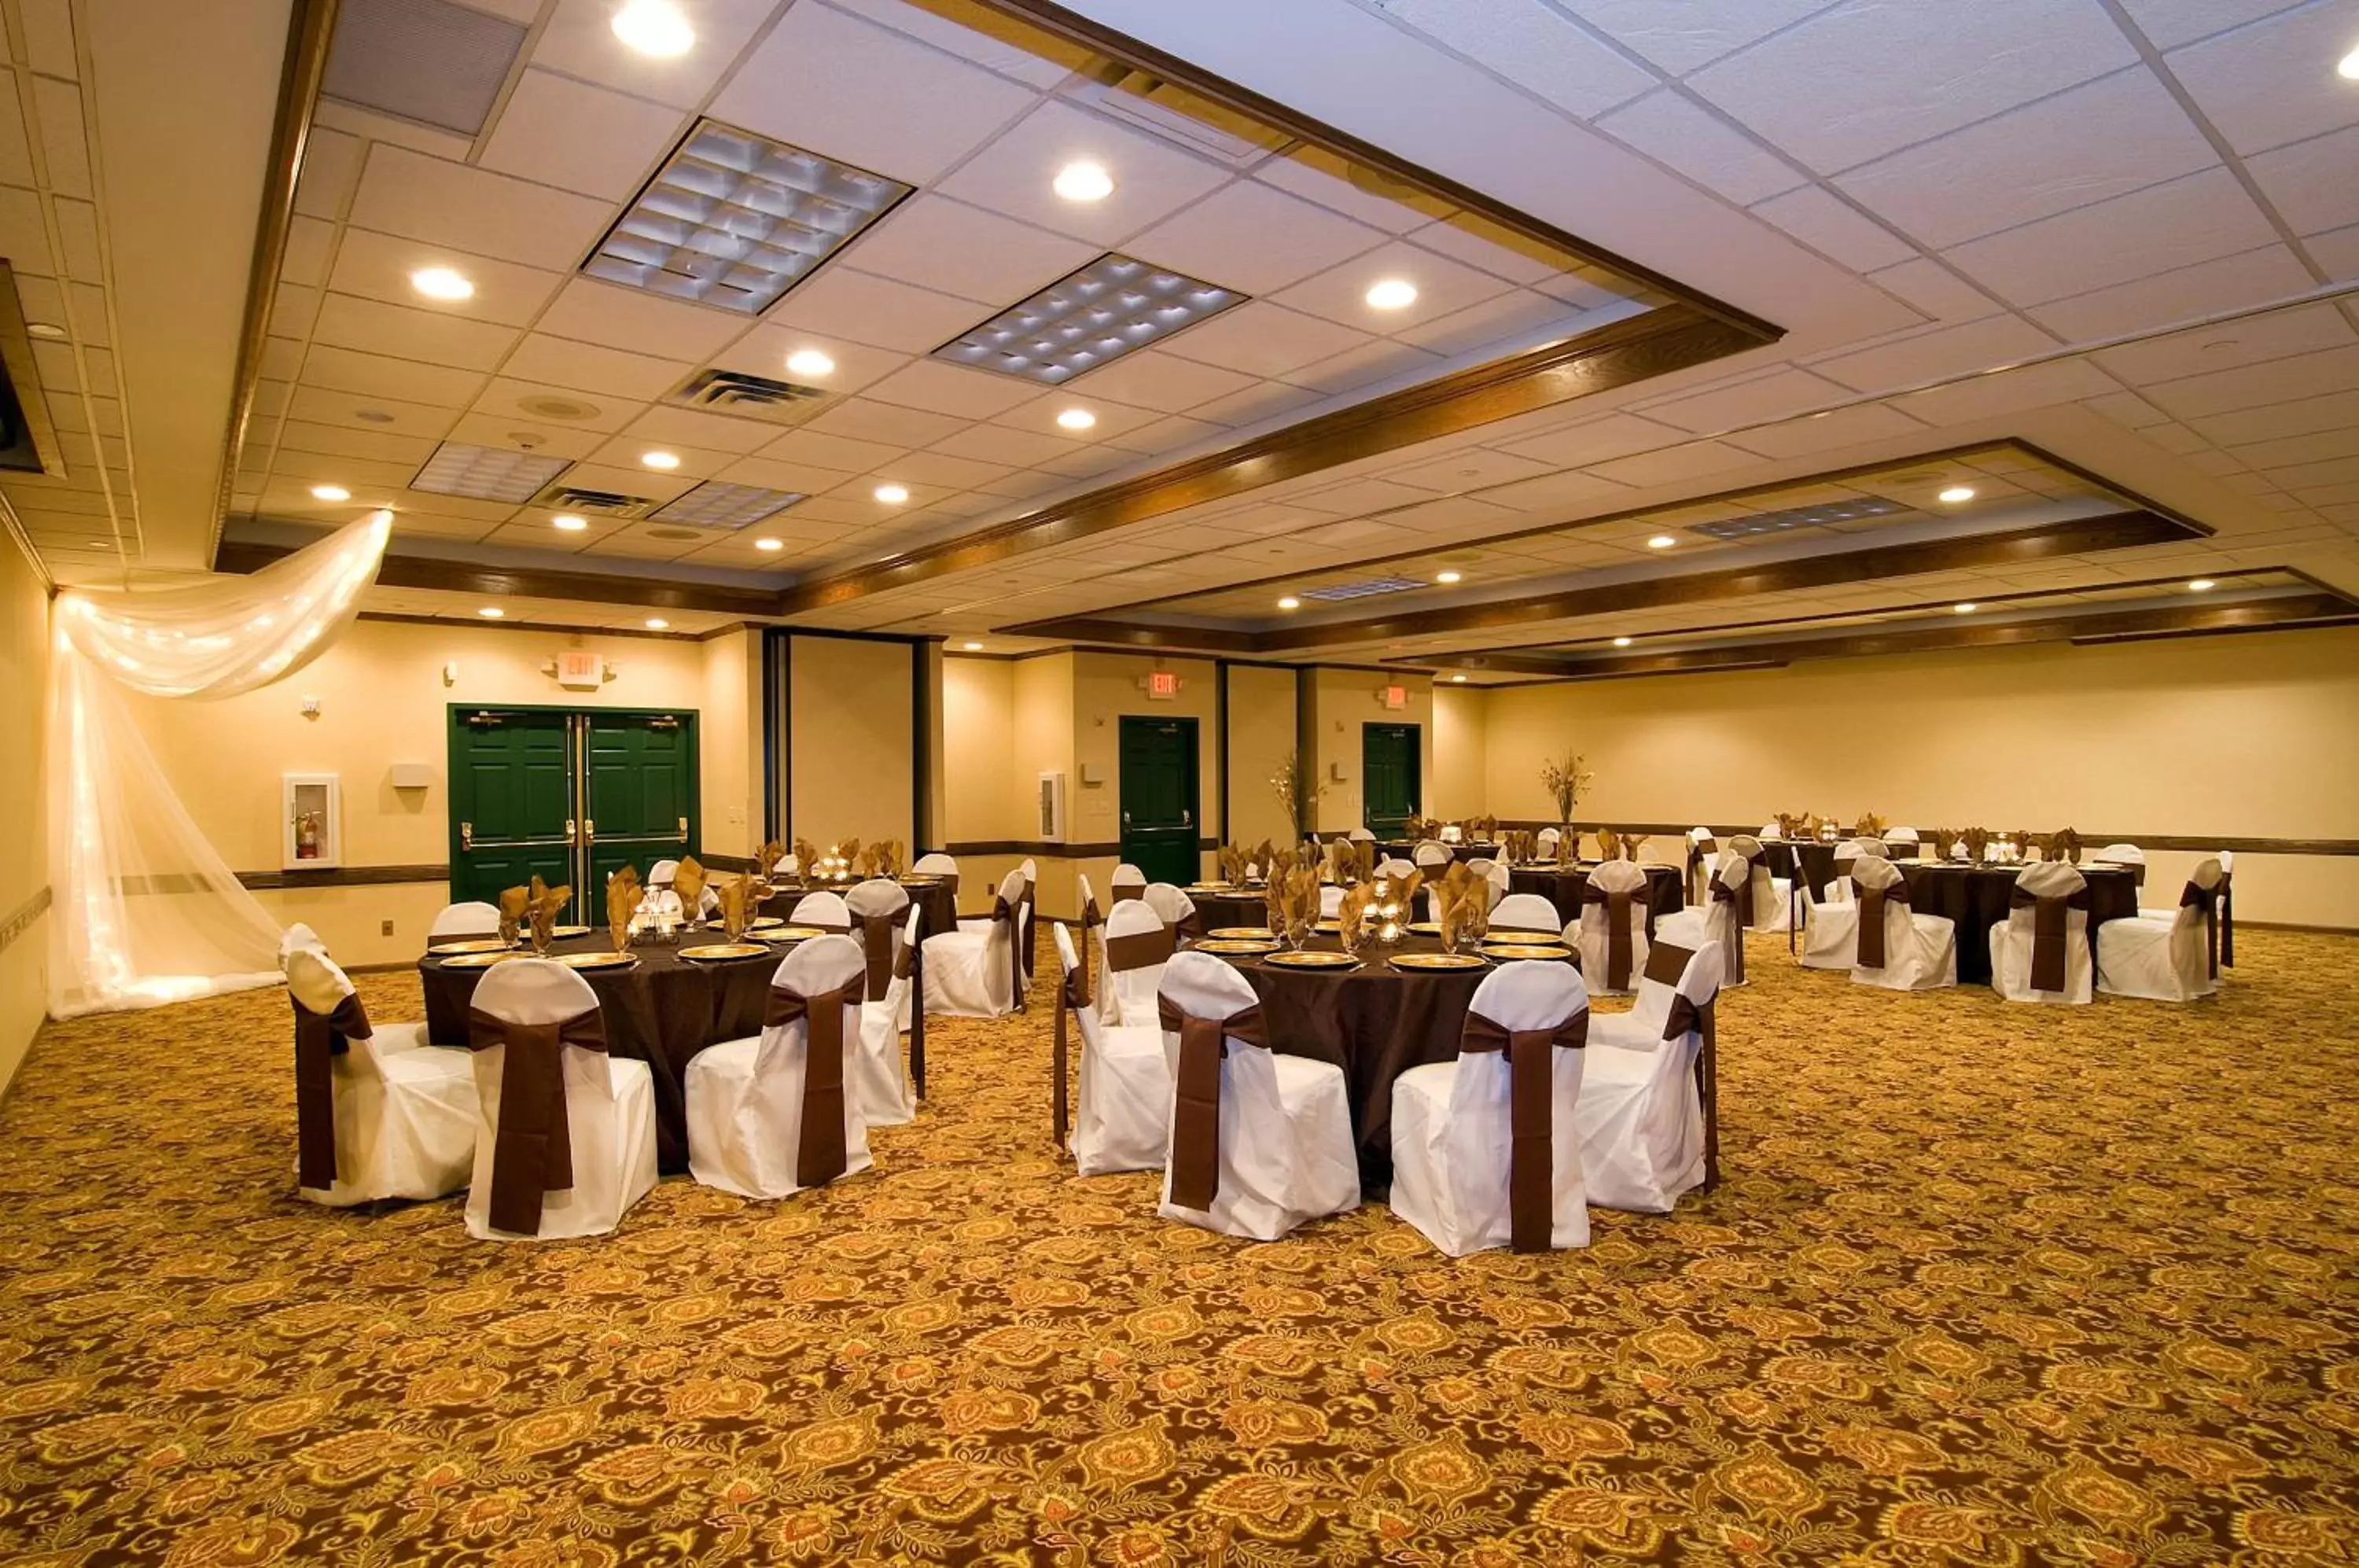 Business facilities, Banquet Facilities in Country Inn & Suites by Radisson, Chanhassen, MN